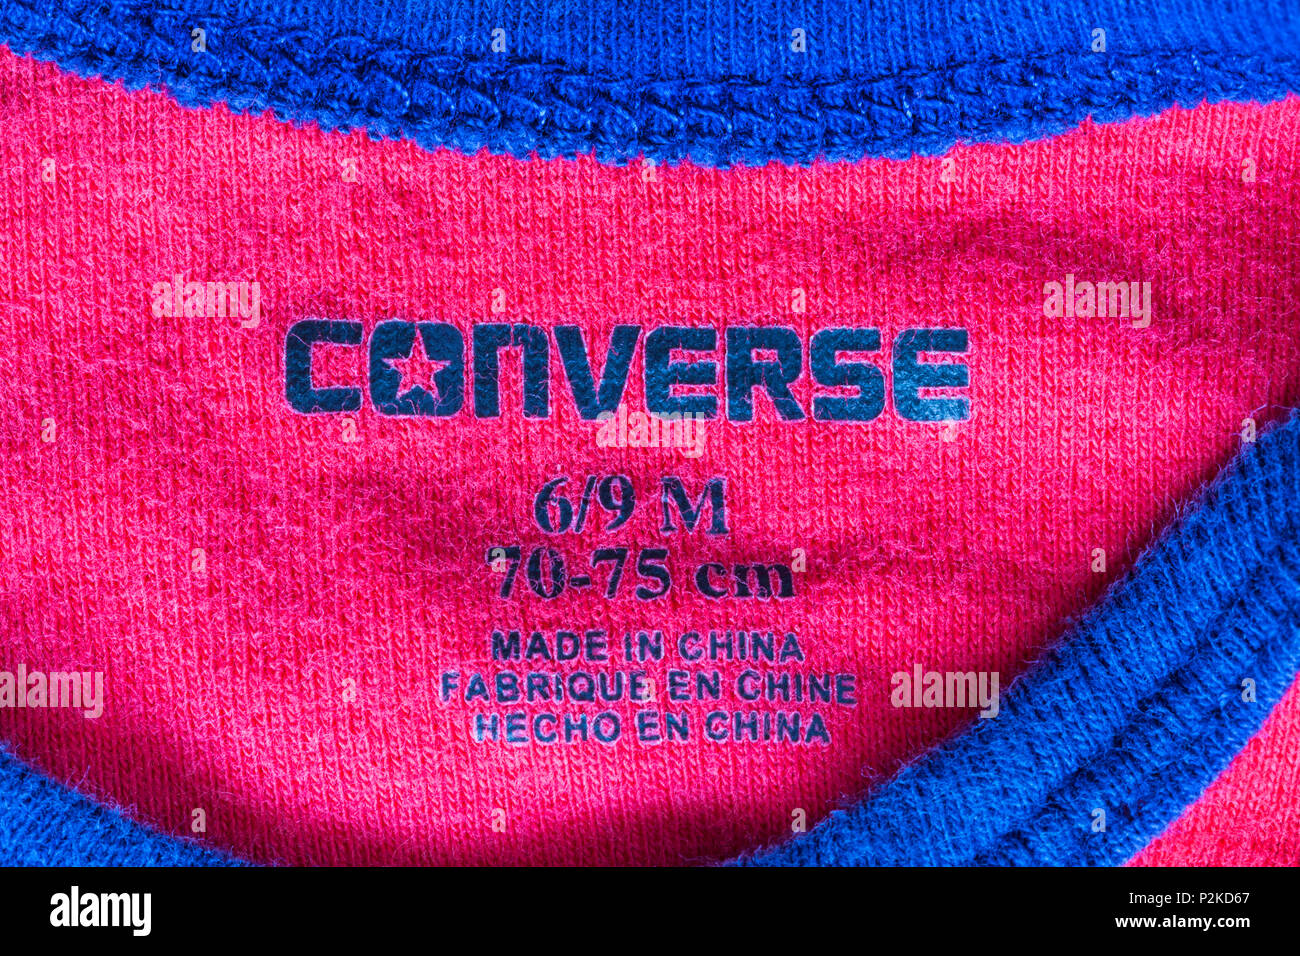 Converse stamp in baby's clothing made in China Stock Photo - Alamy